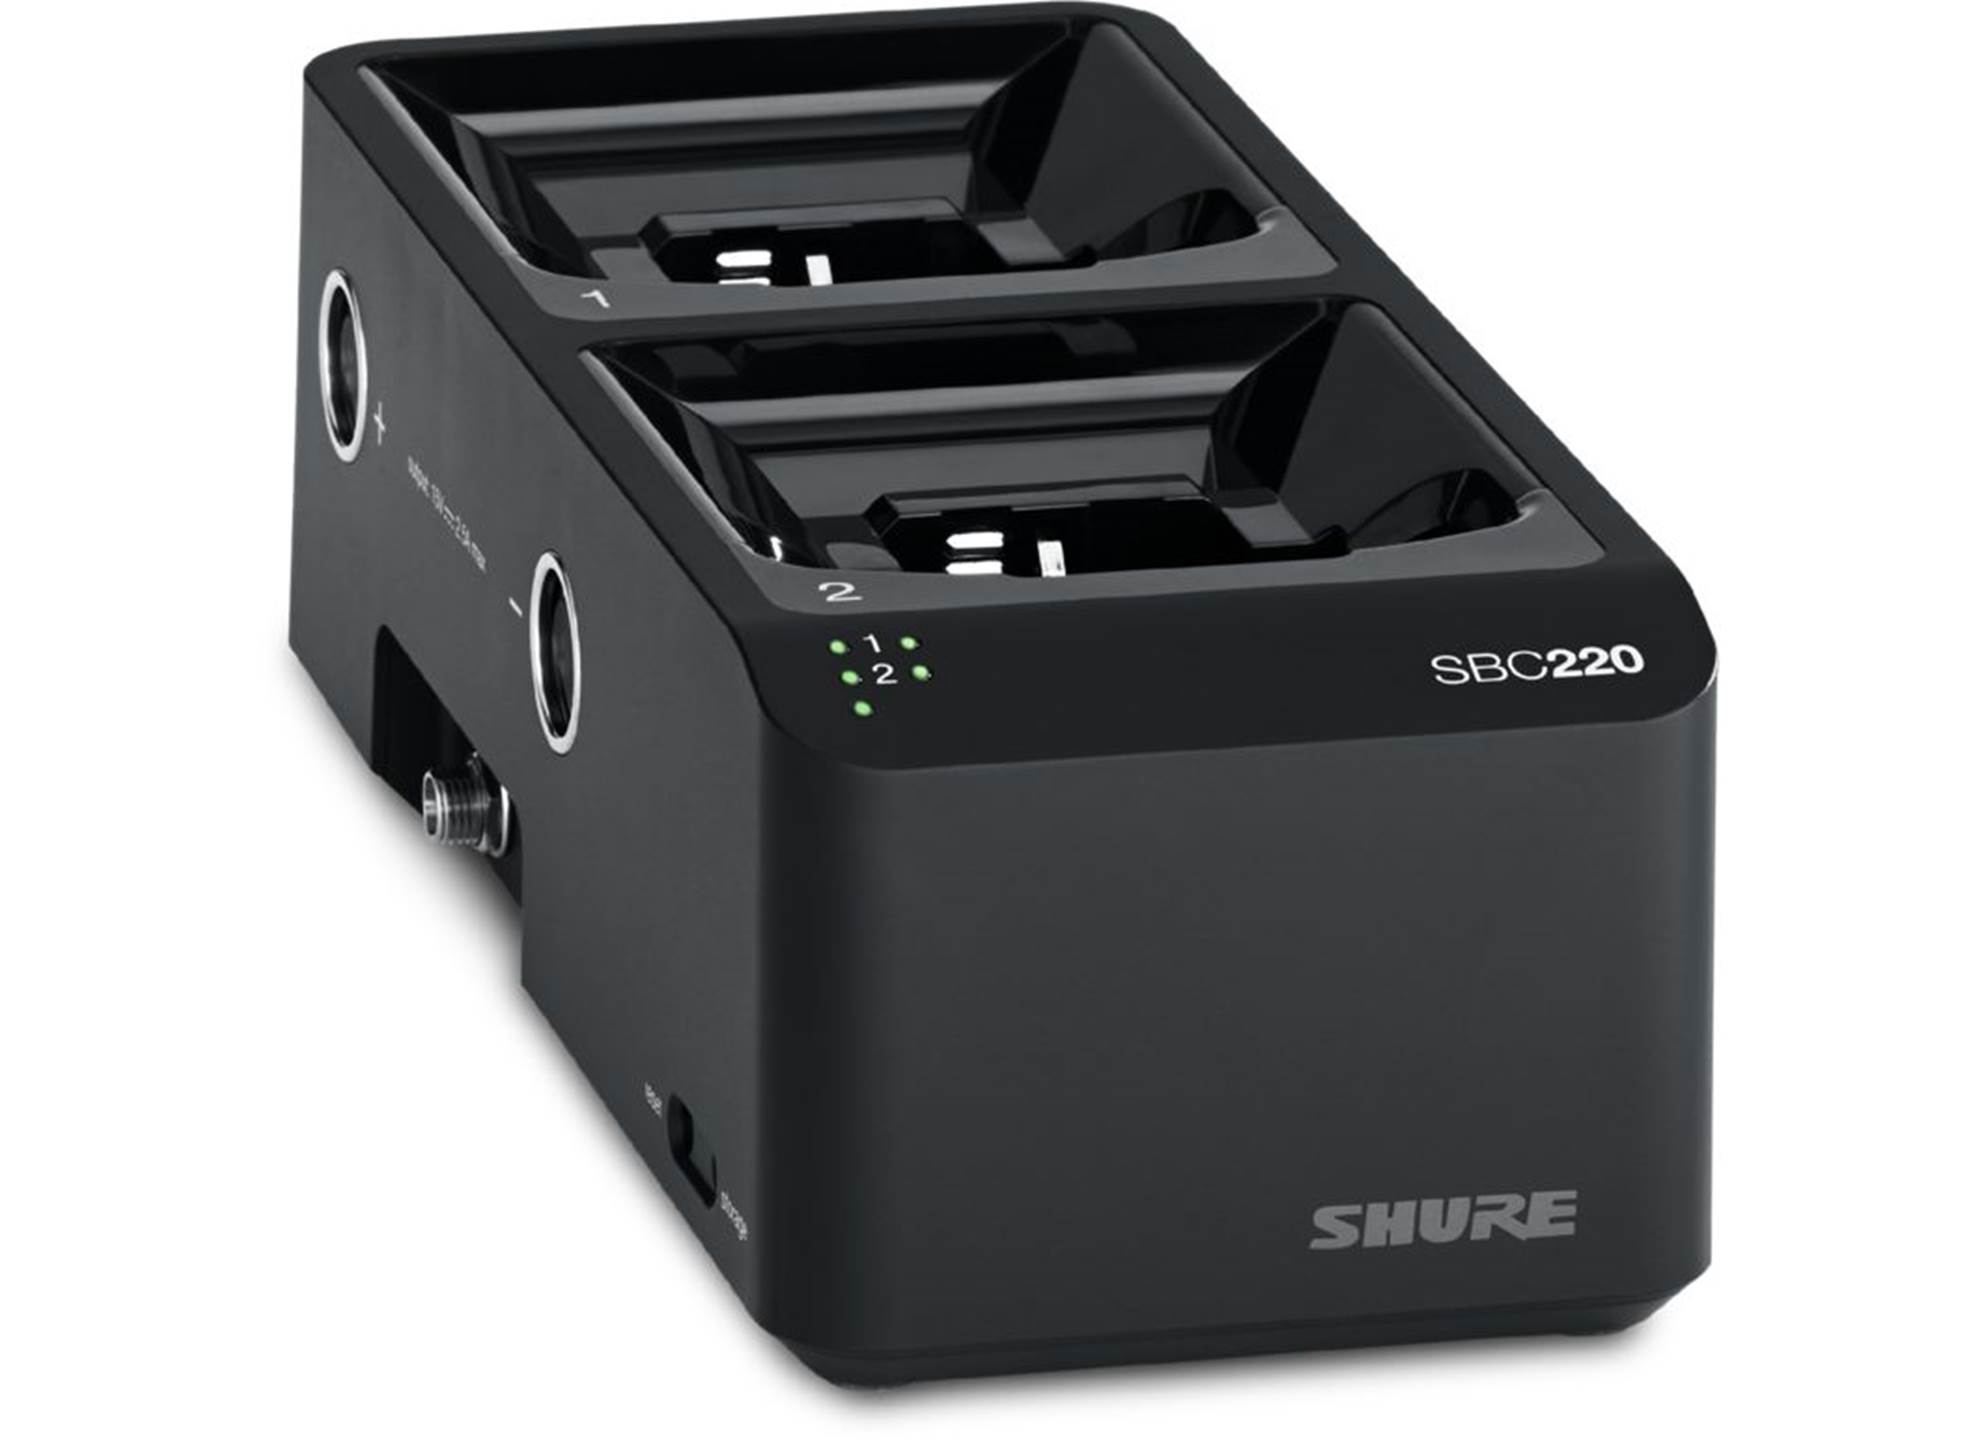 SBC220-E Dual Networked Docking Charger (with PSU)